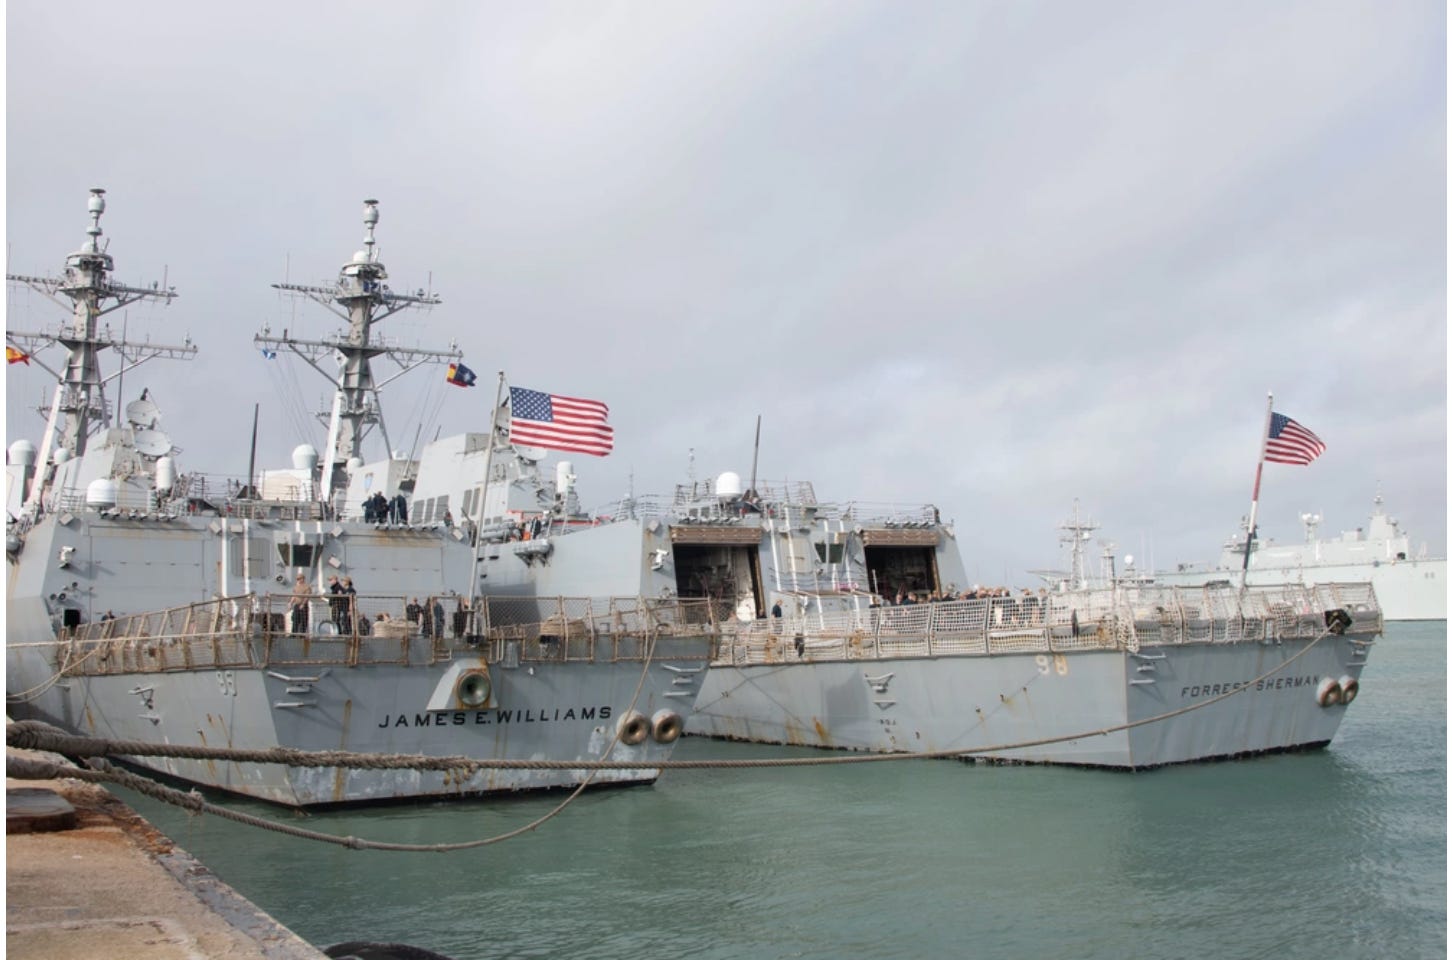 SNMG2 transfers its flagship from USS Forrest Sherman (DDG 98) to USS James E Williams (DDG 95) as USS Forrest Sherman completes its deployment and prepares to return to homeport in Norfolk, VA.